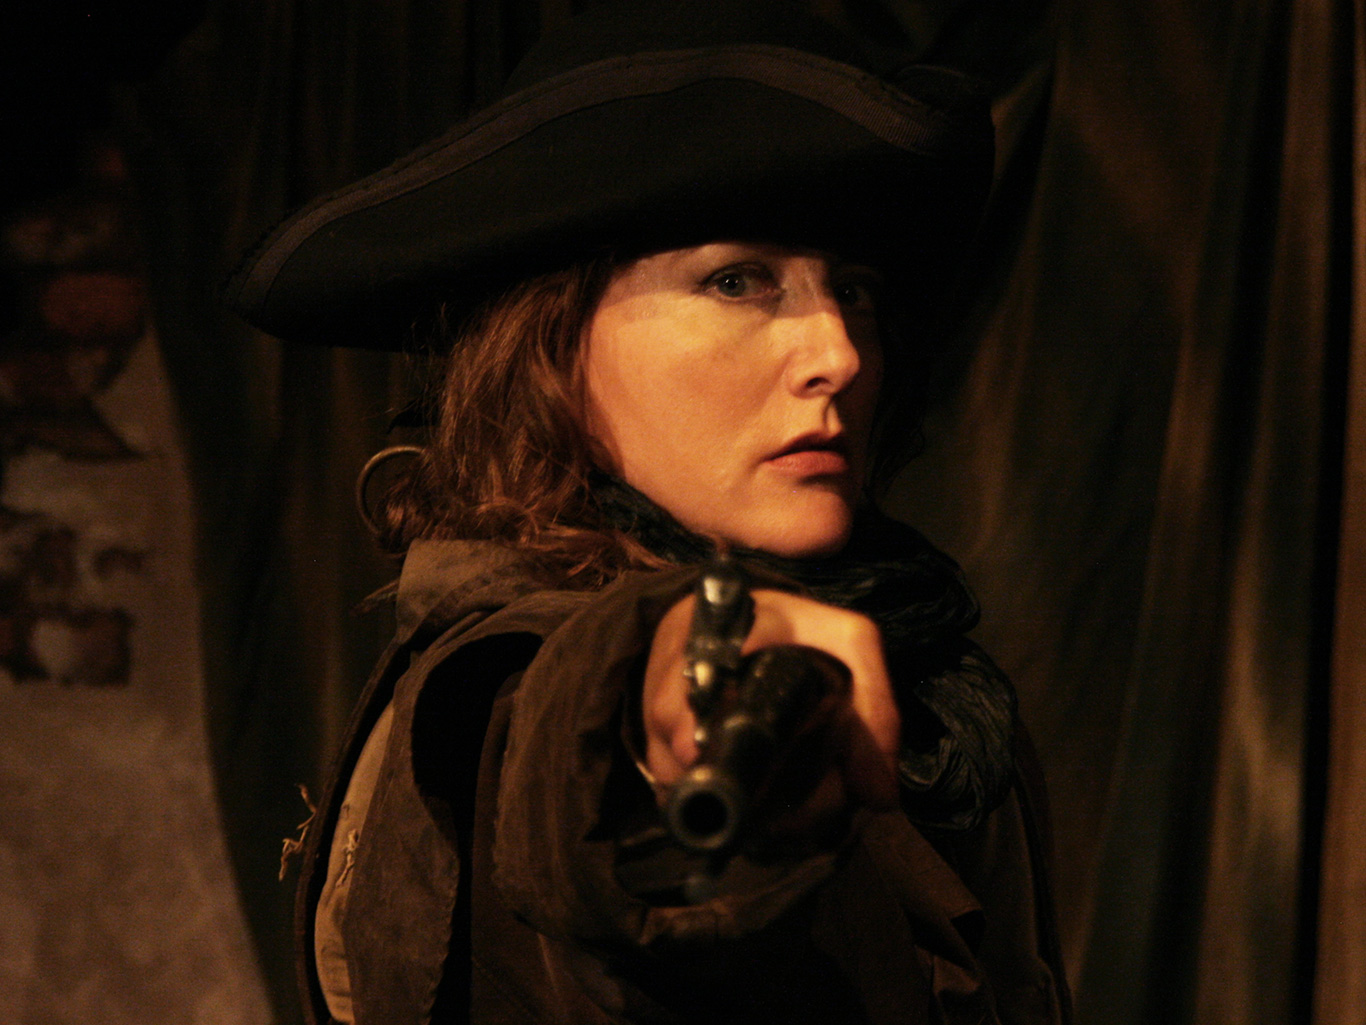 Taylor Wilson as the title character